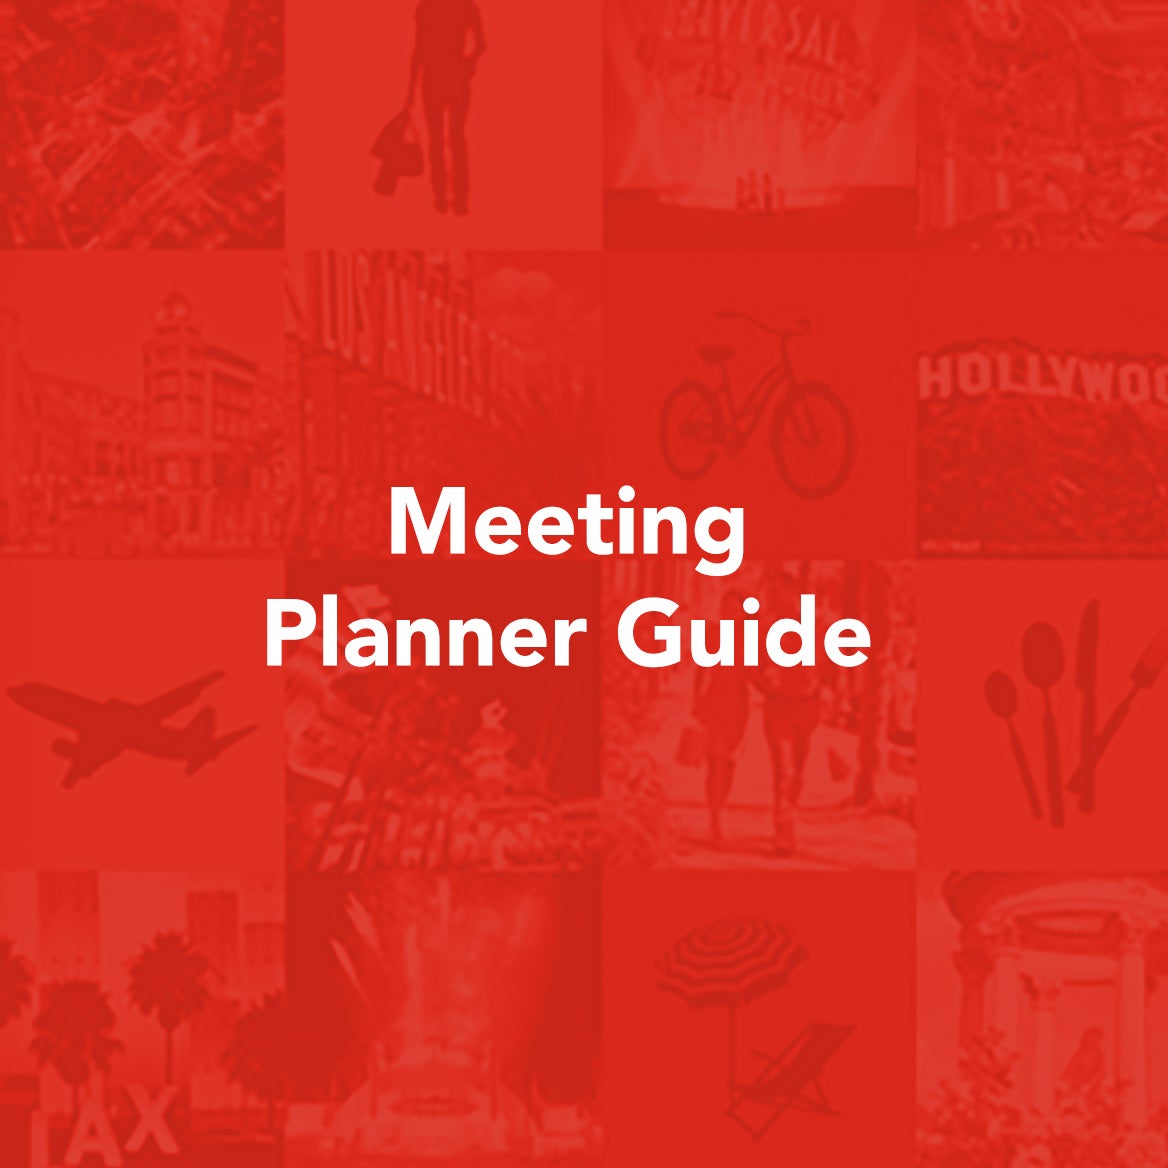 Meeting Planners Guide